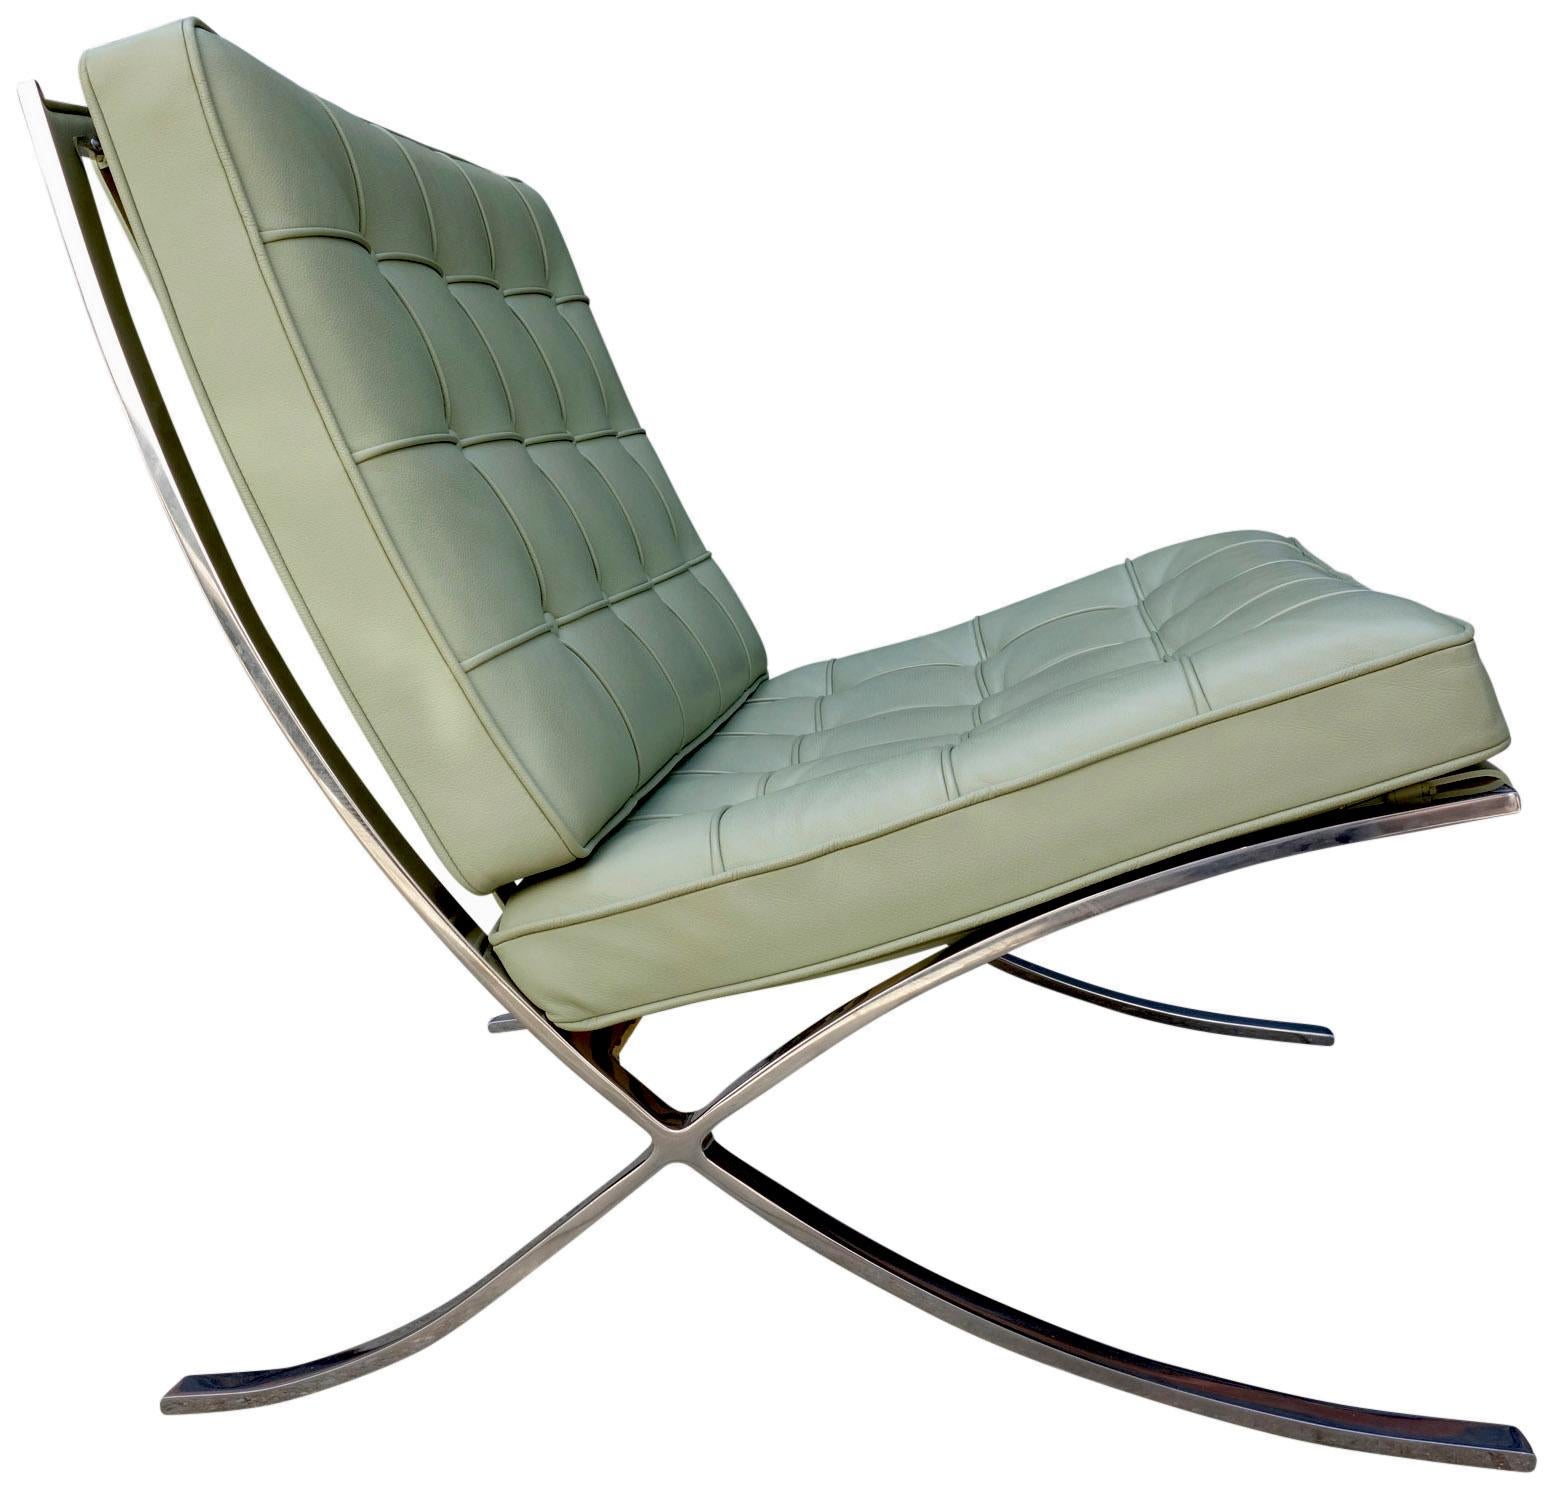 German Midcentury Barcelona Chairs in Special Order Stainless Steel and Leather